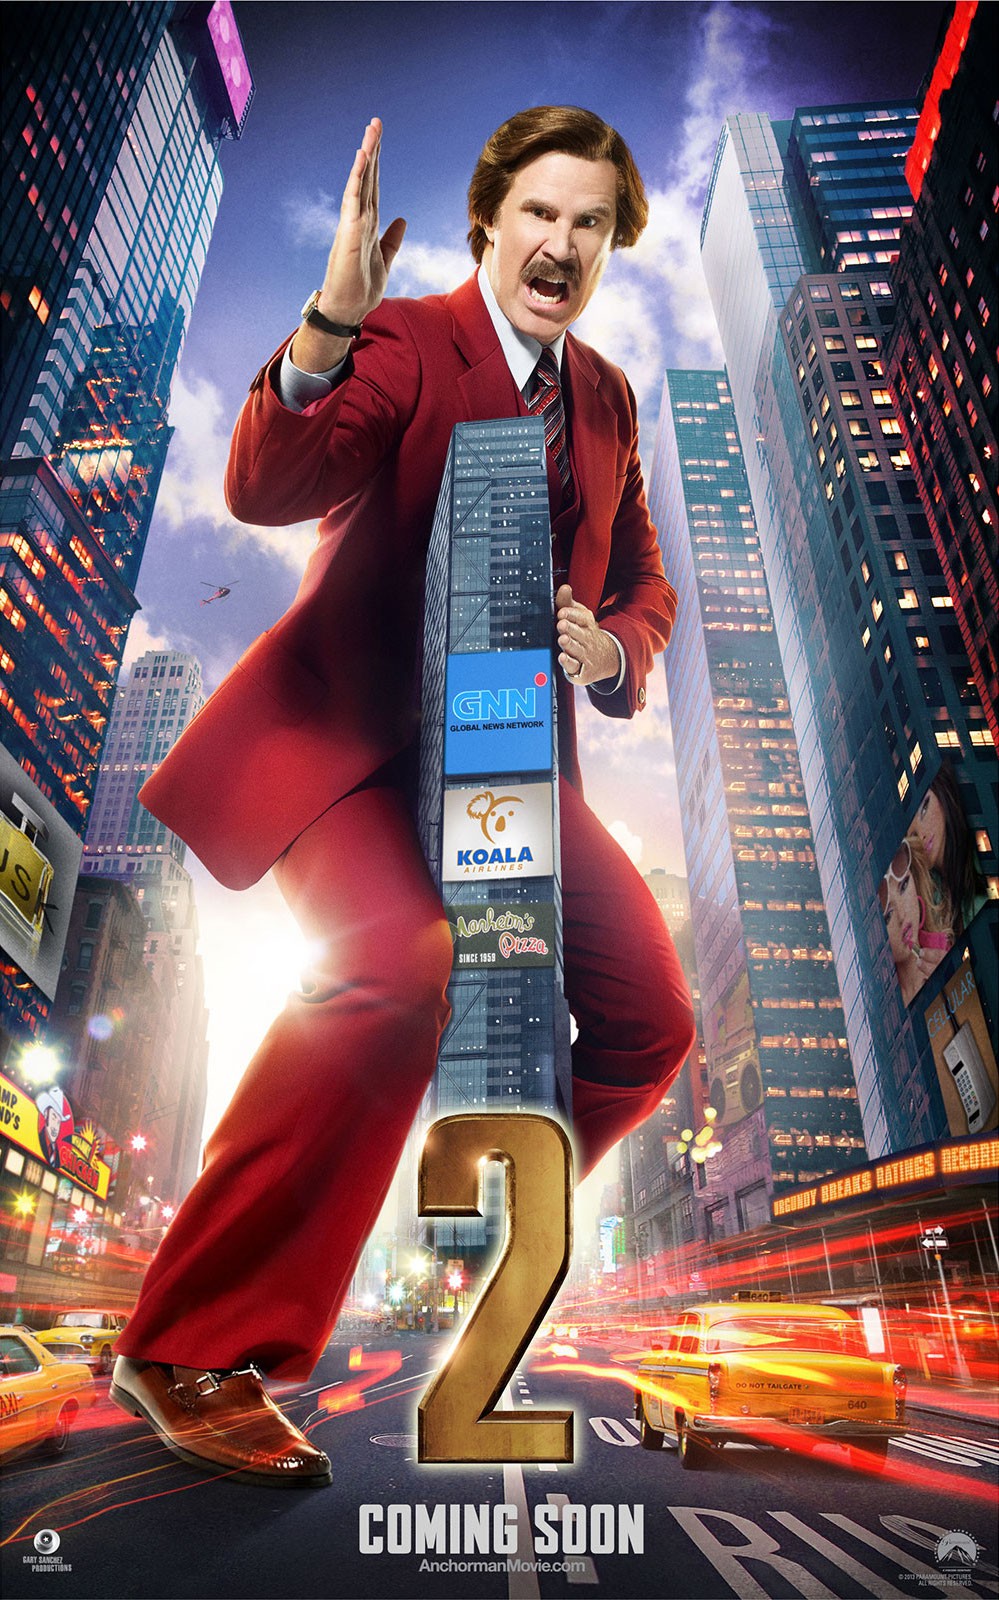 Poster of Paramount Pictures' Anchorman: The Legend Continues (2013)